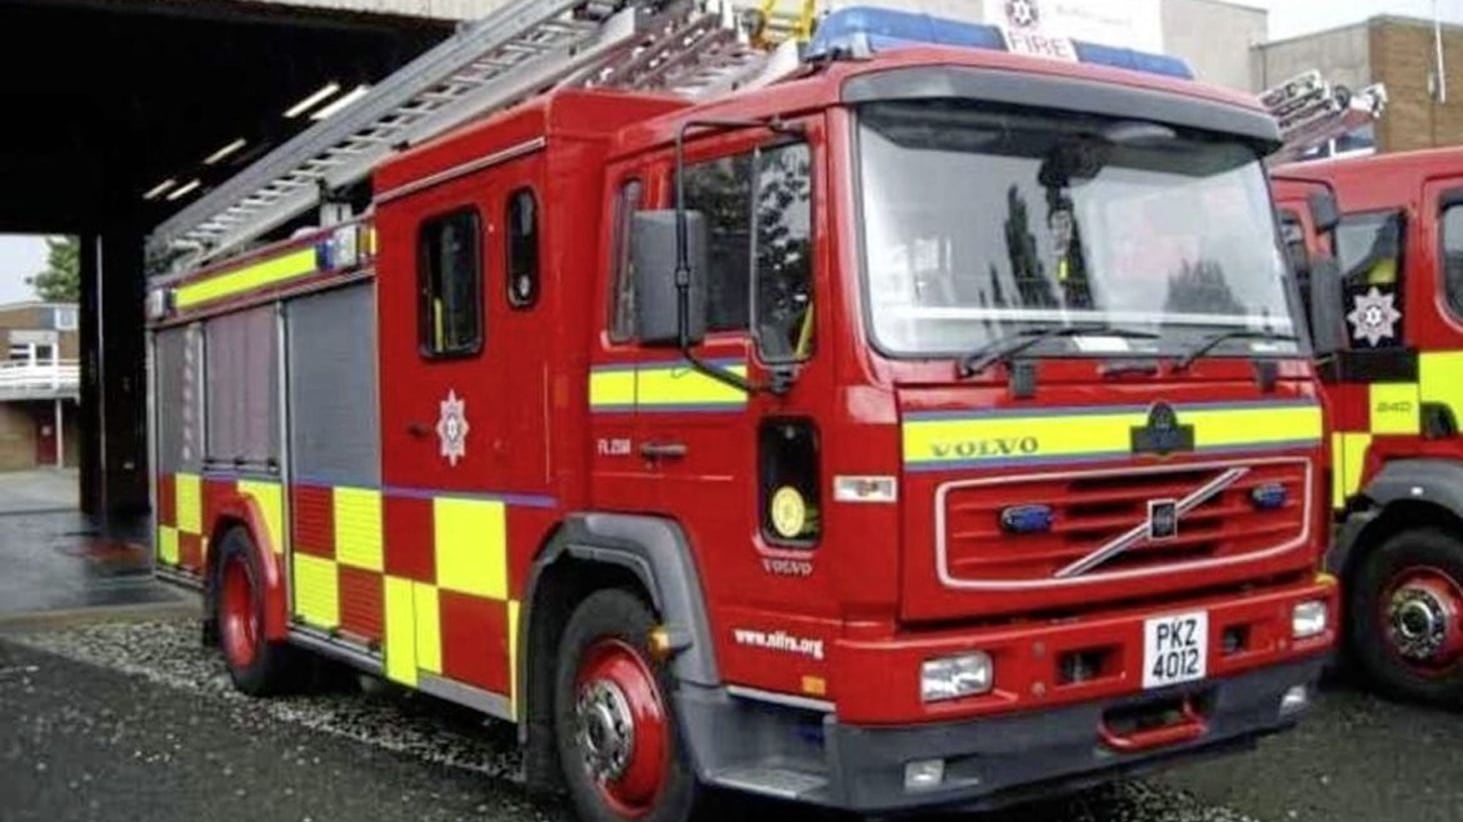 Three fire appliances were called to the scene of a blaze in Co Fermanagh on Sunday. 